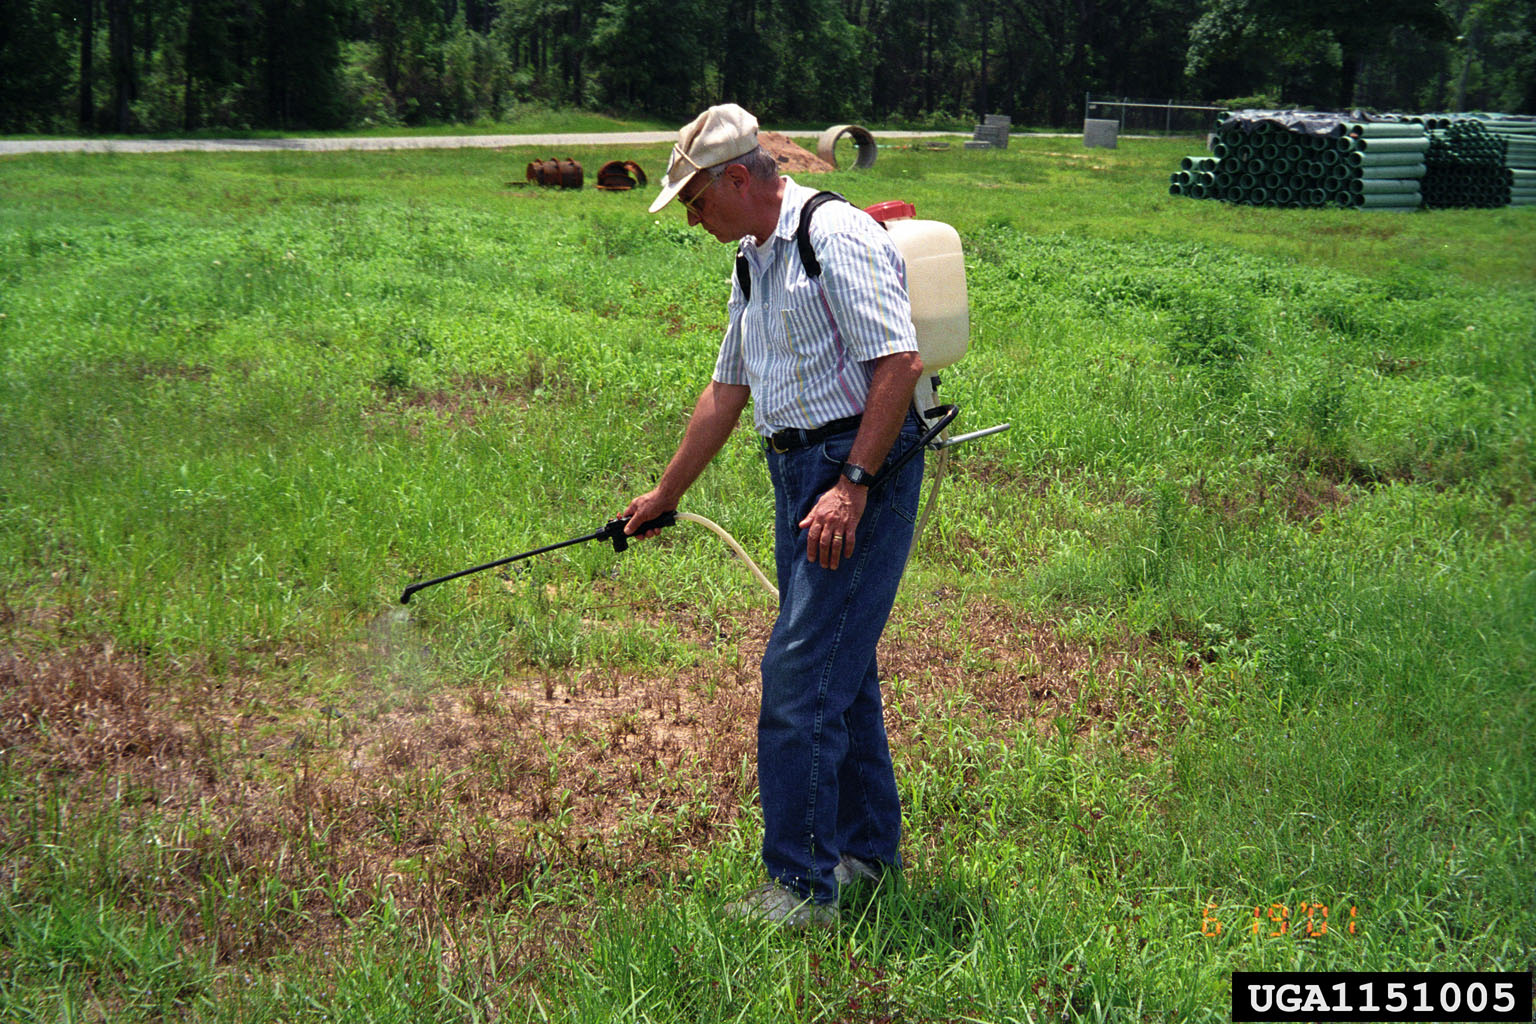 Photograph of a man in a white shirt and jeans and beige hat spraying herbicide onto a field of grass.